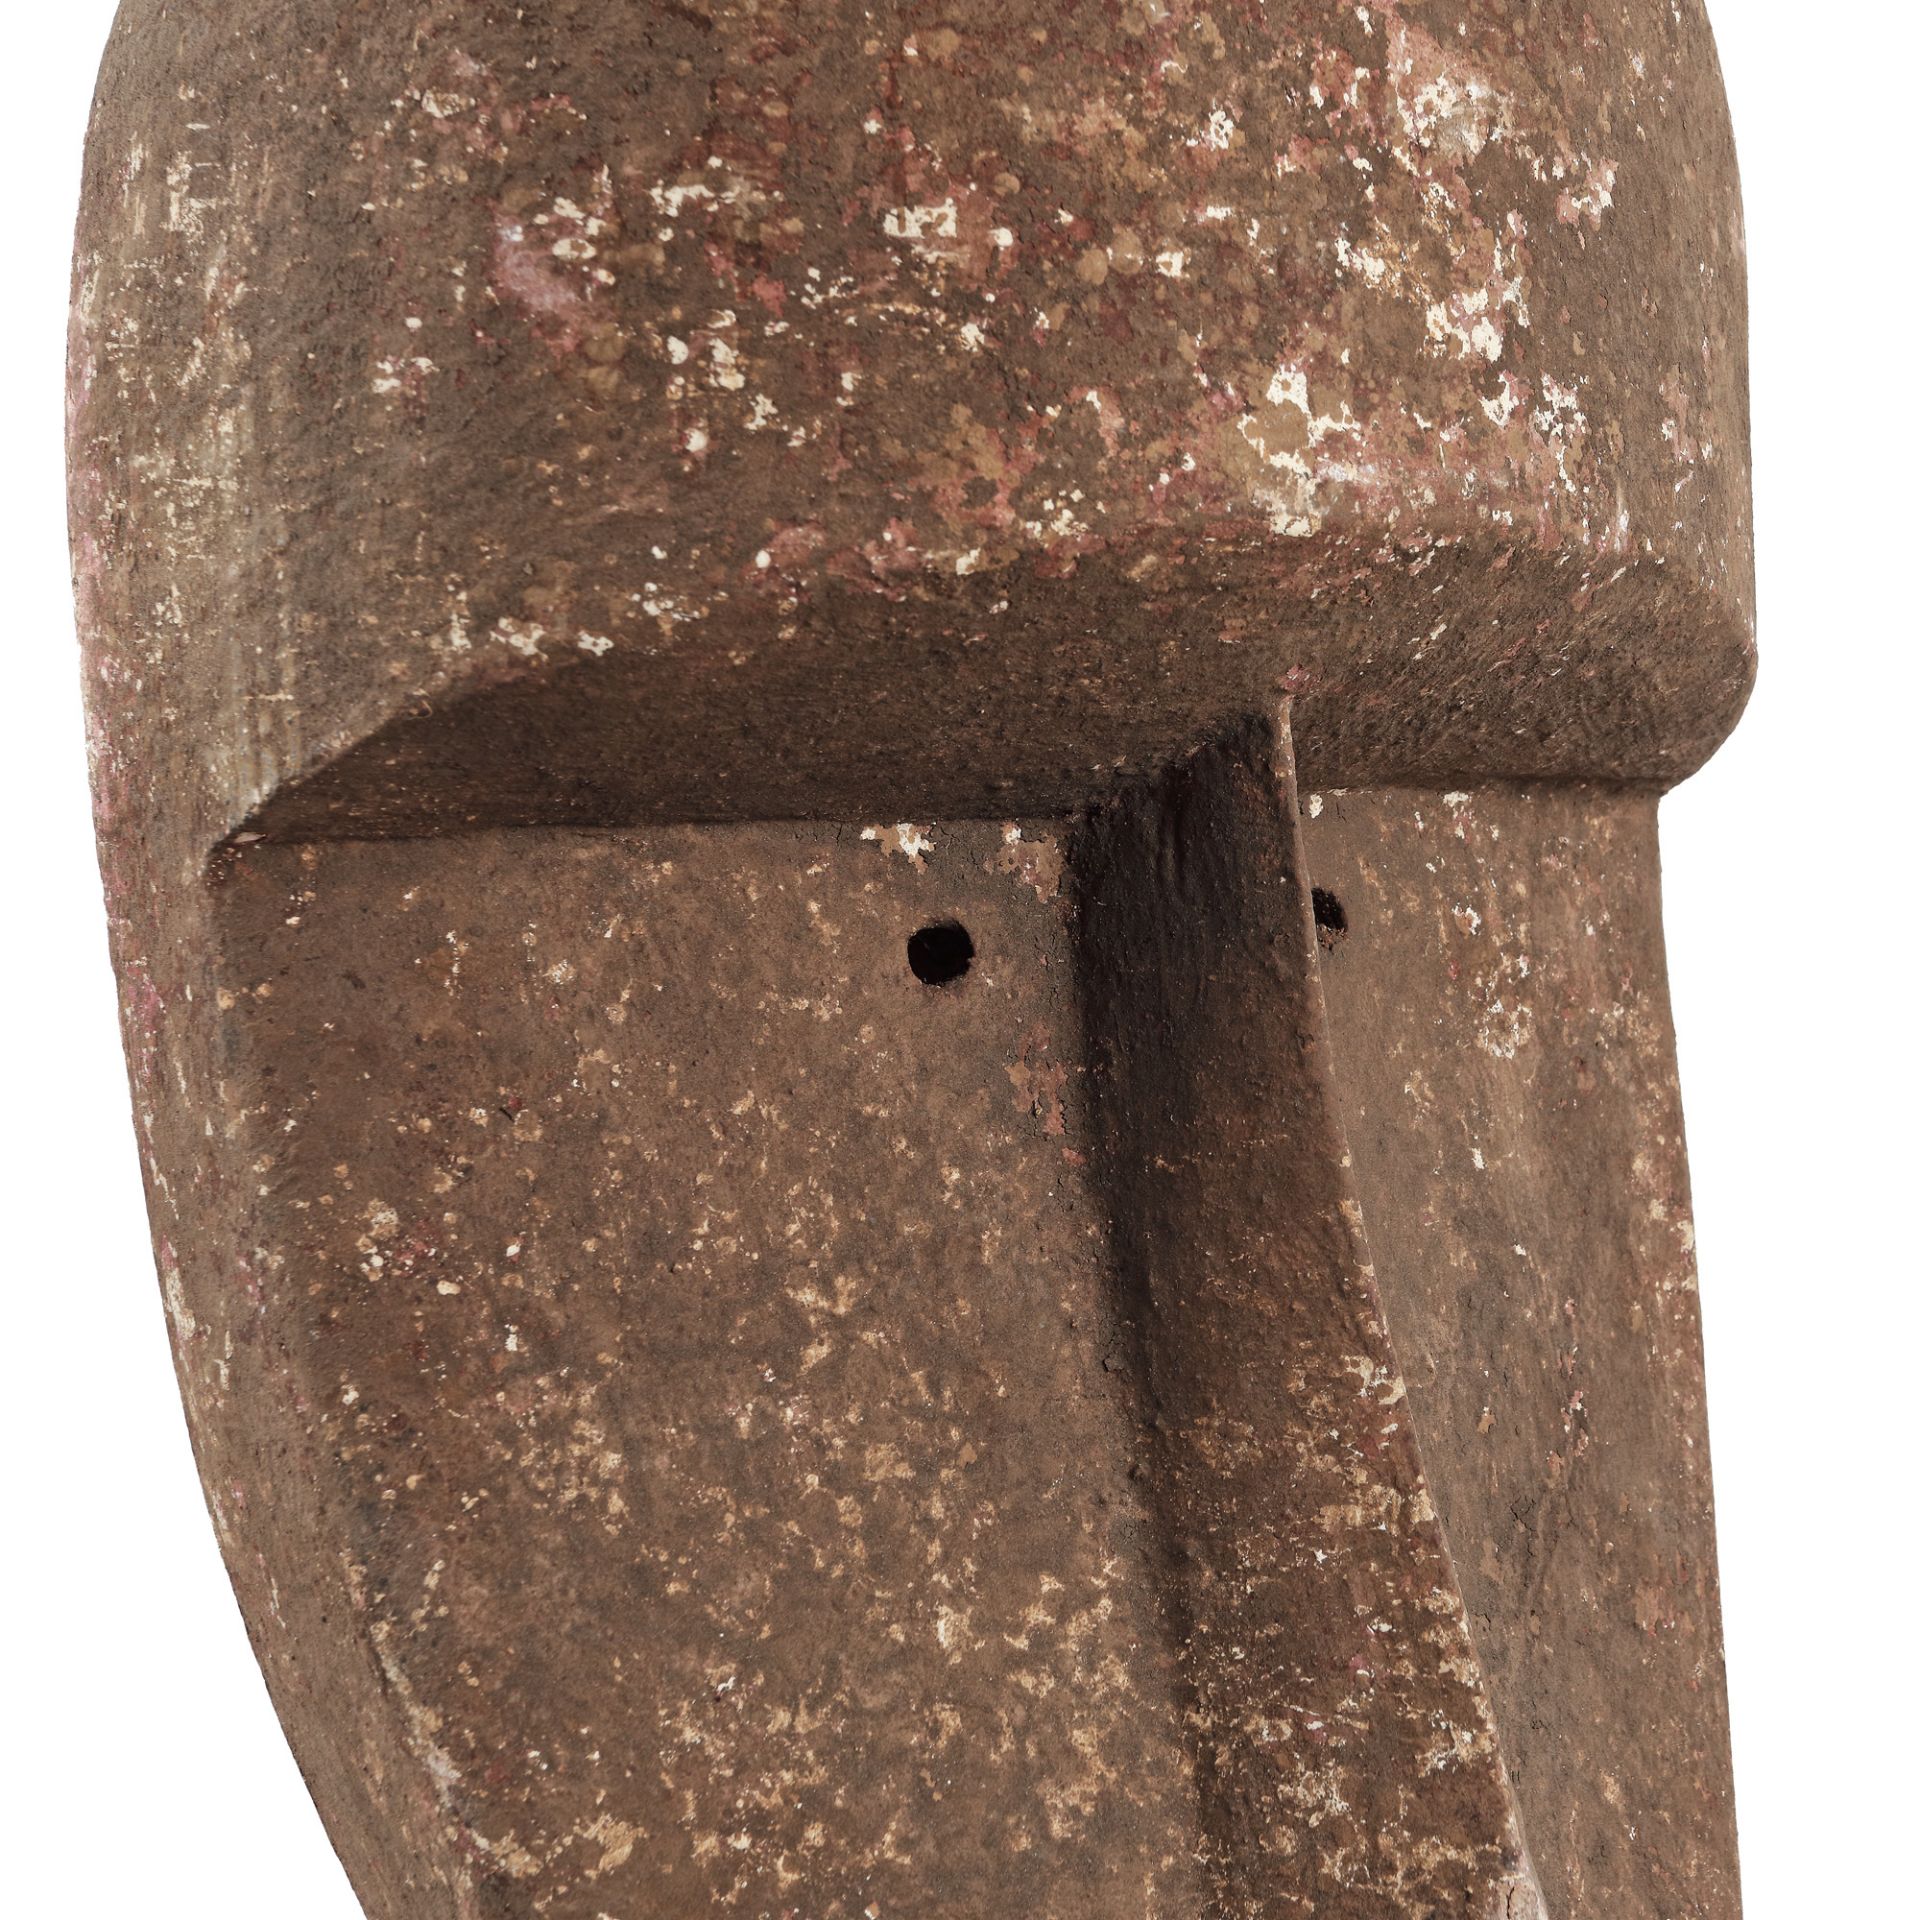 Stone mask, representing an idol, Indonesia, possibly the beginning of the 20th century - Image 3 of 3